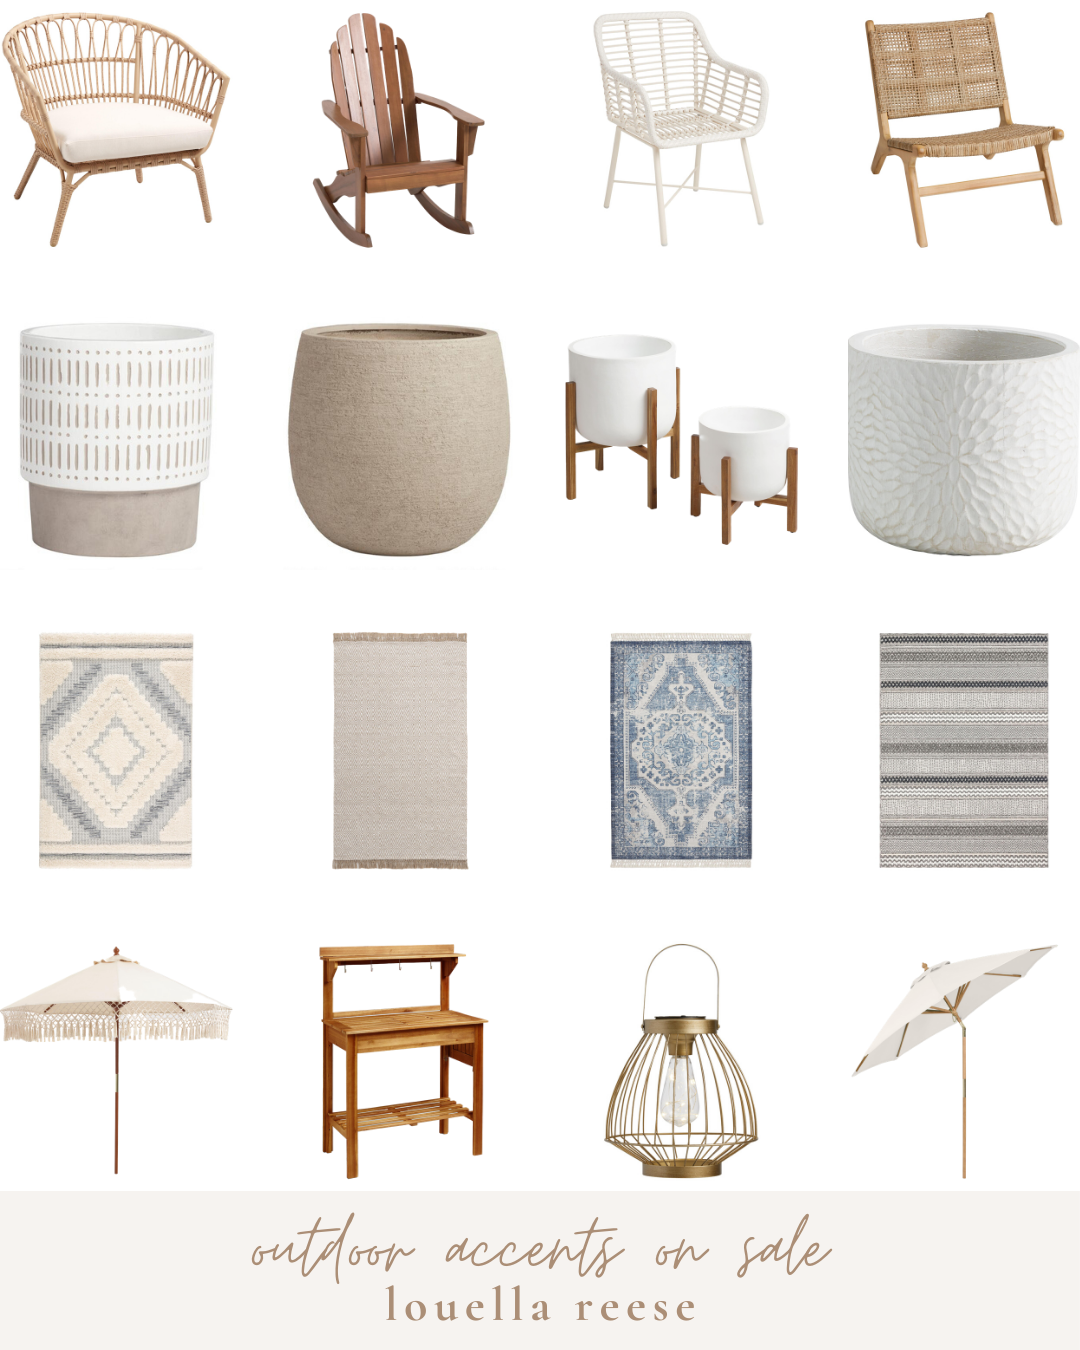 Outdoor Accents on Sale || Outdoor Furniture Sale | Neutral Outdoor Decor